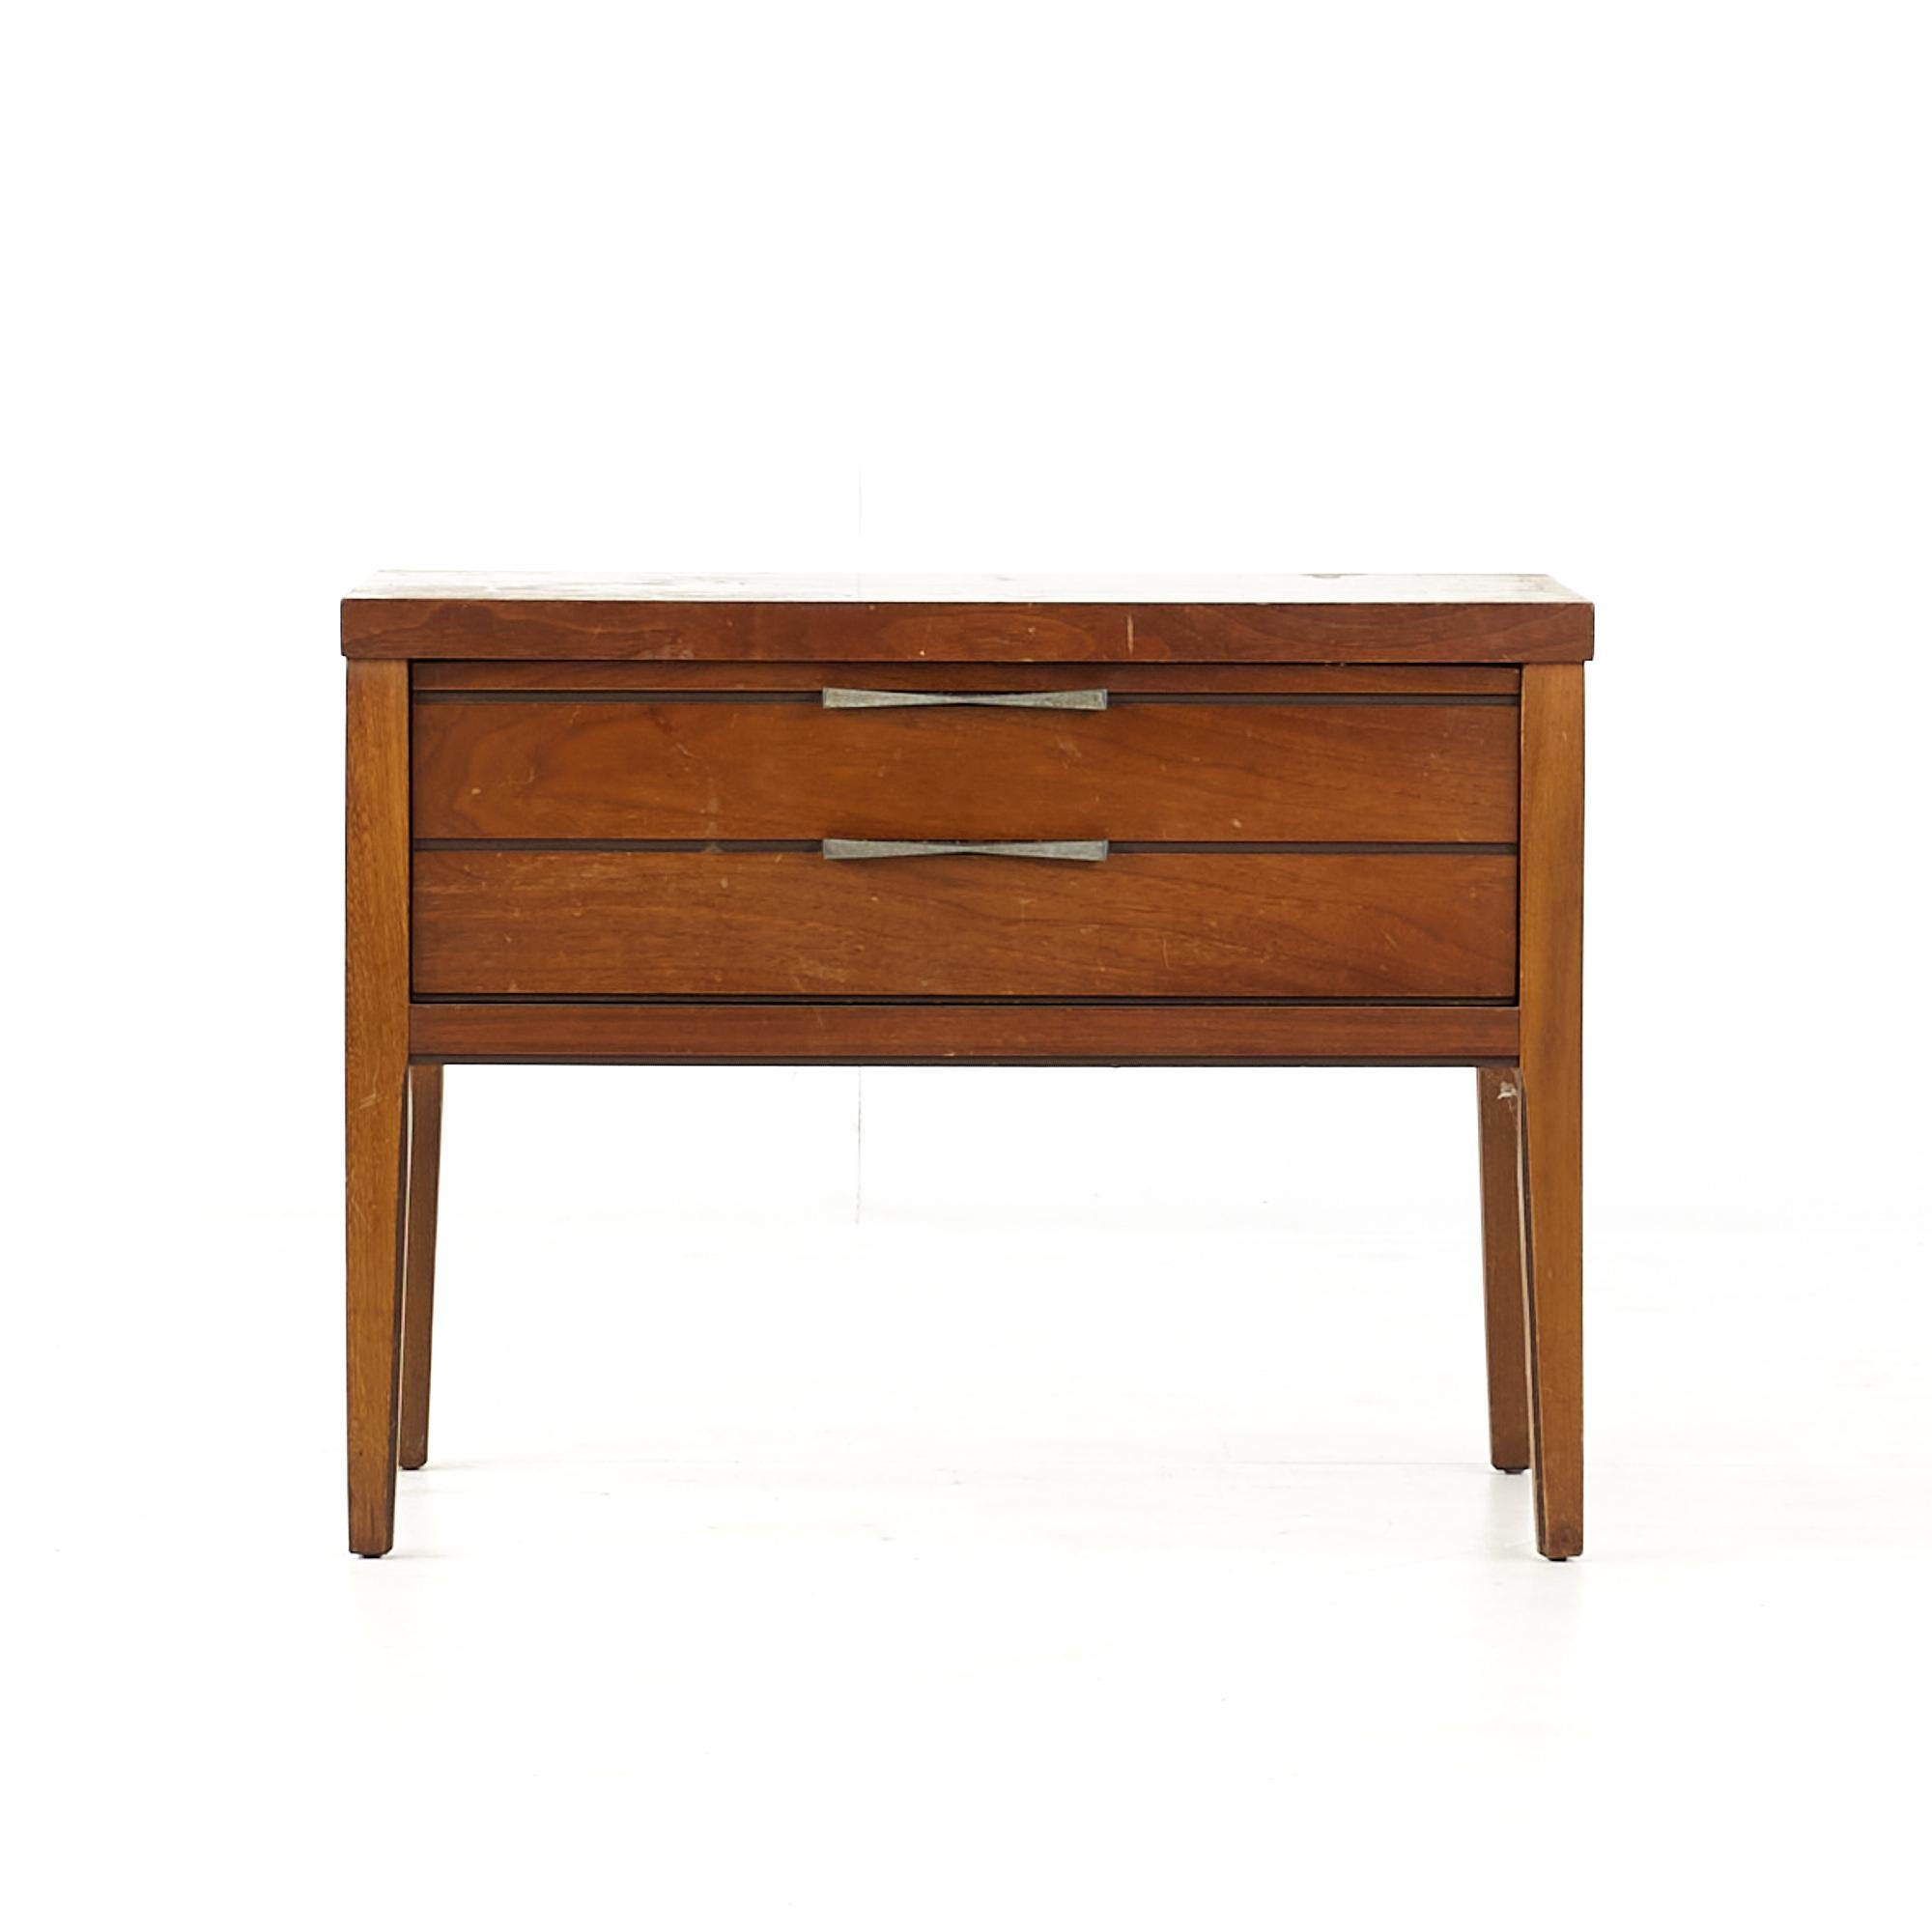 Lane Bowtie Tuxedo mid century walnut nightstand

This nightstand measures: 26 wide x 15 deep x 20 inches high

All pieces of furniture can be had in what we call restored vintage condition. That means the piece is restored upon purchase so it’s